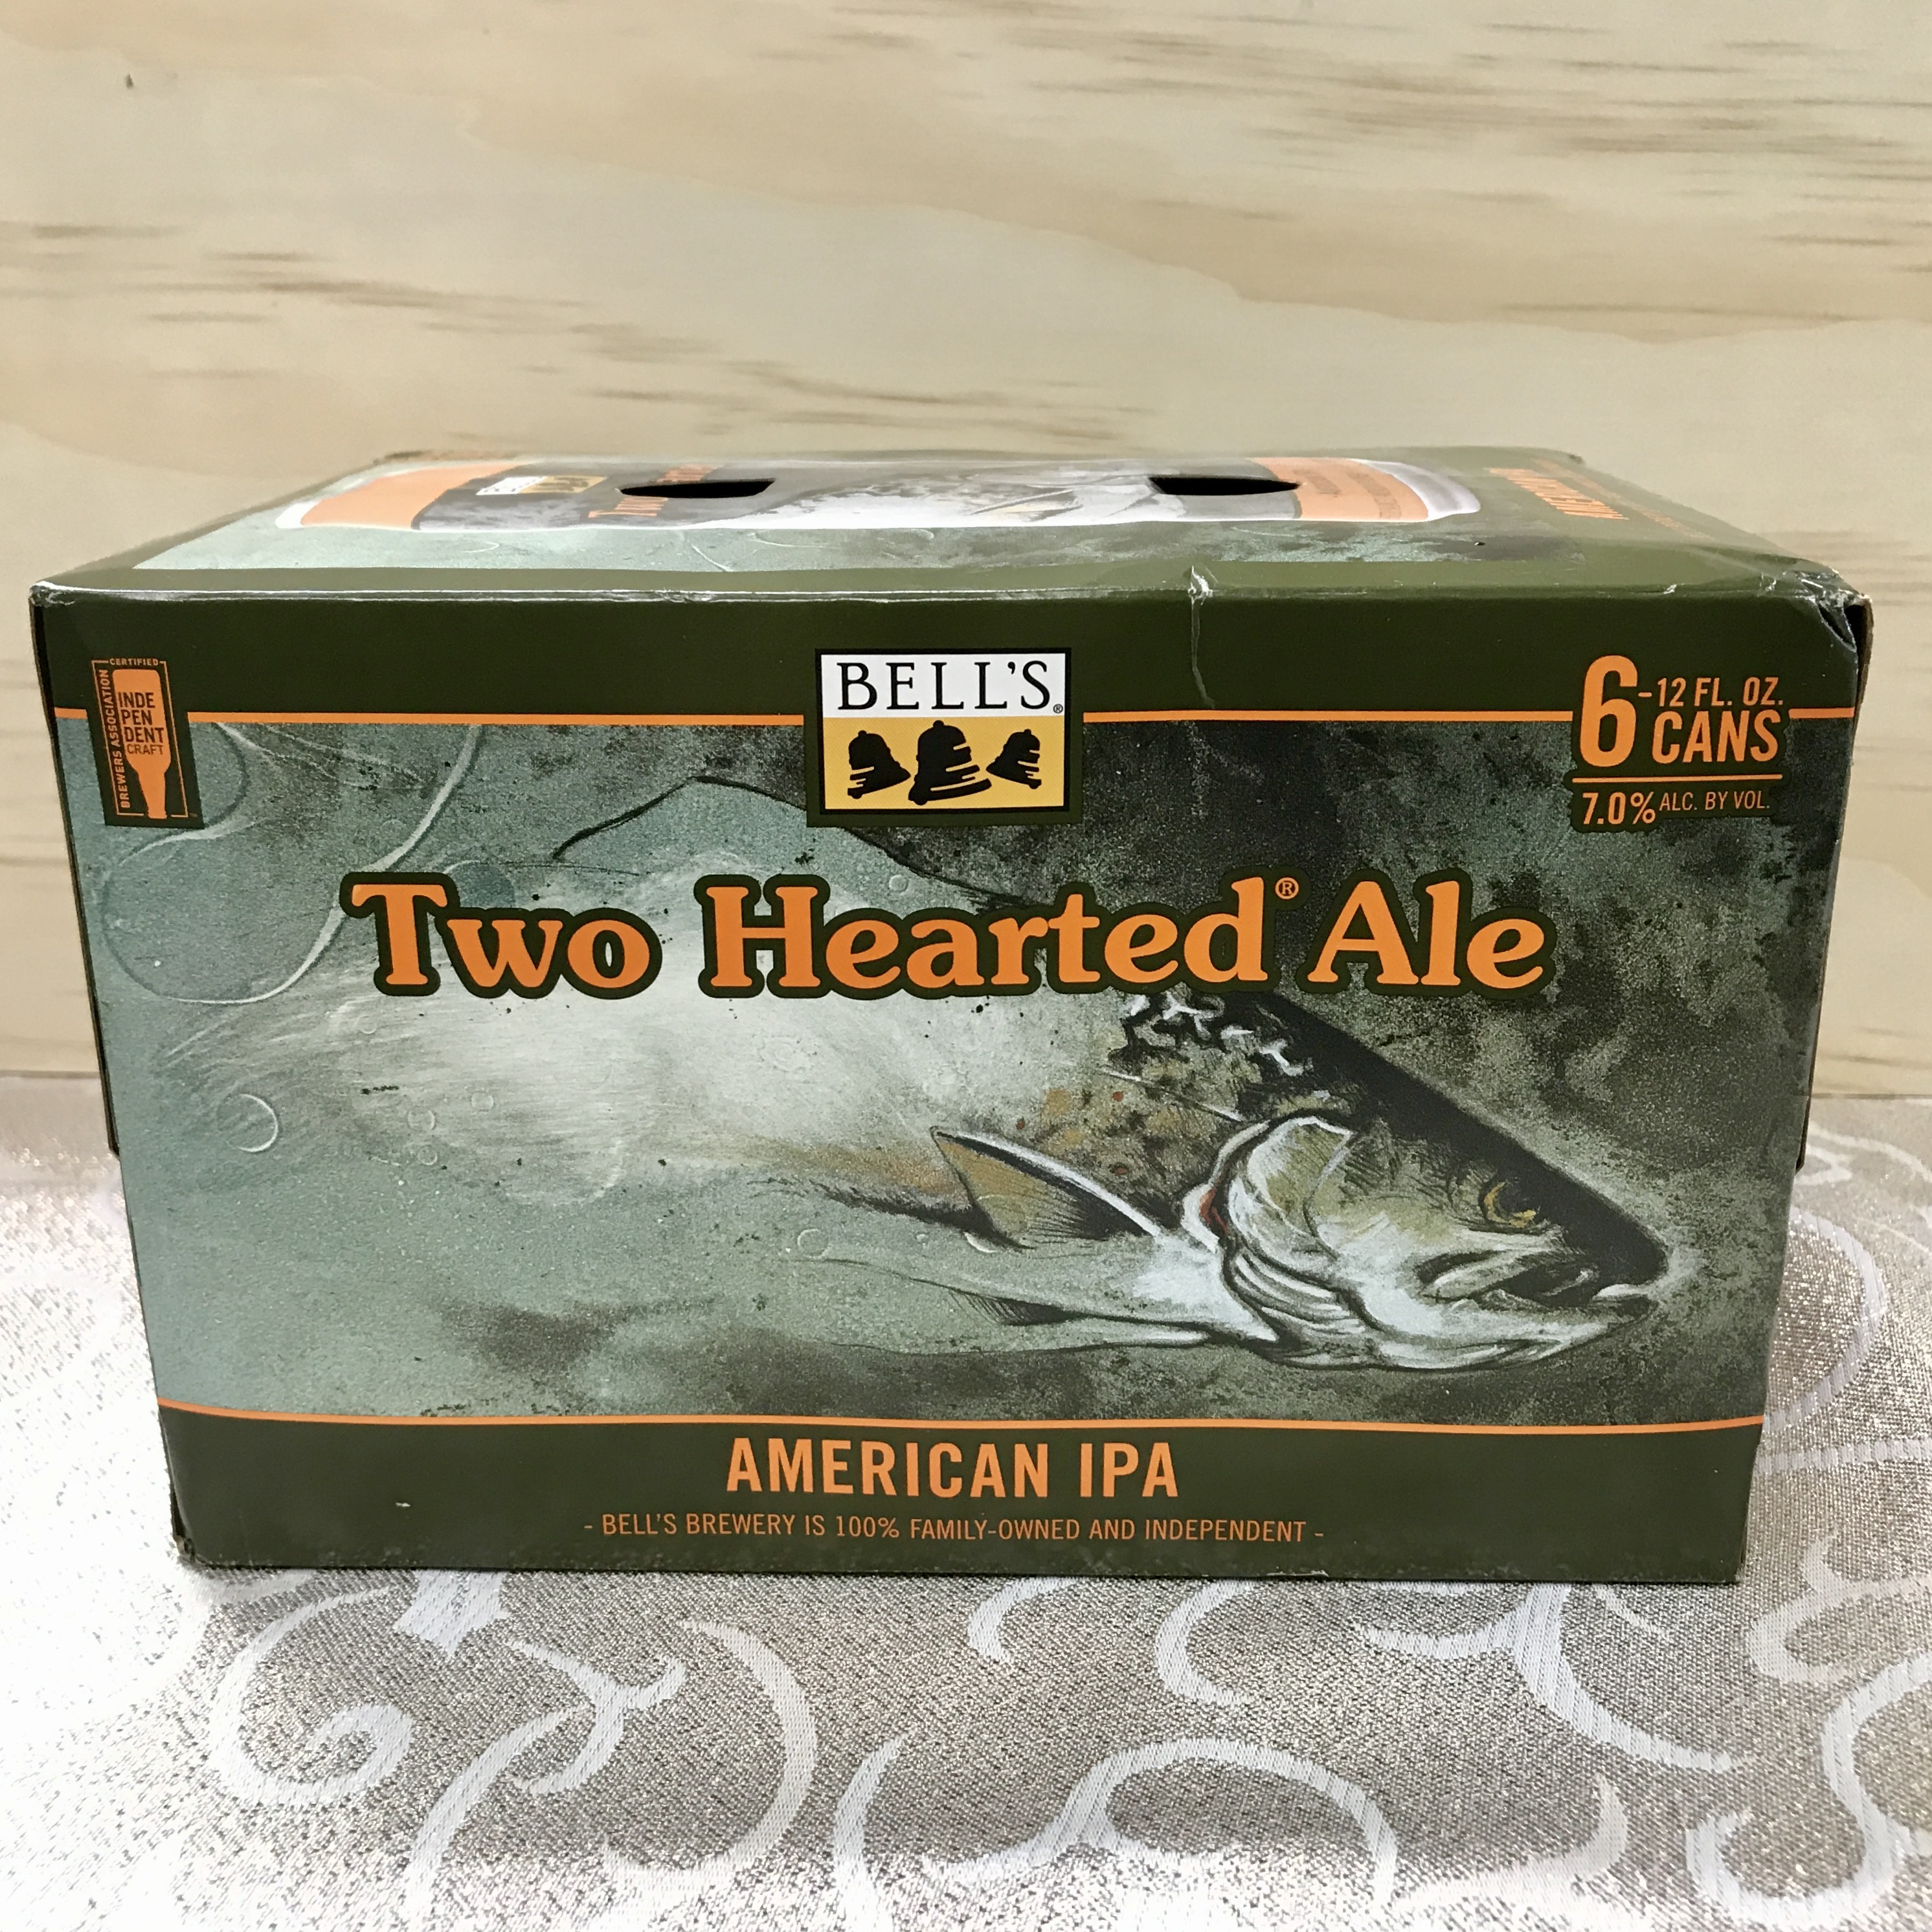 Bell's Two Hearted Ale American IPA 6pk/12oz cans